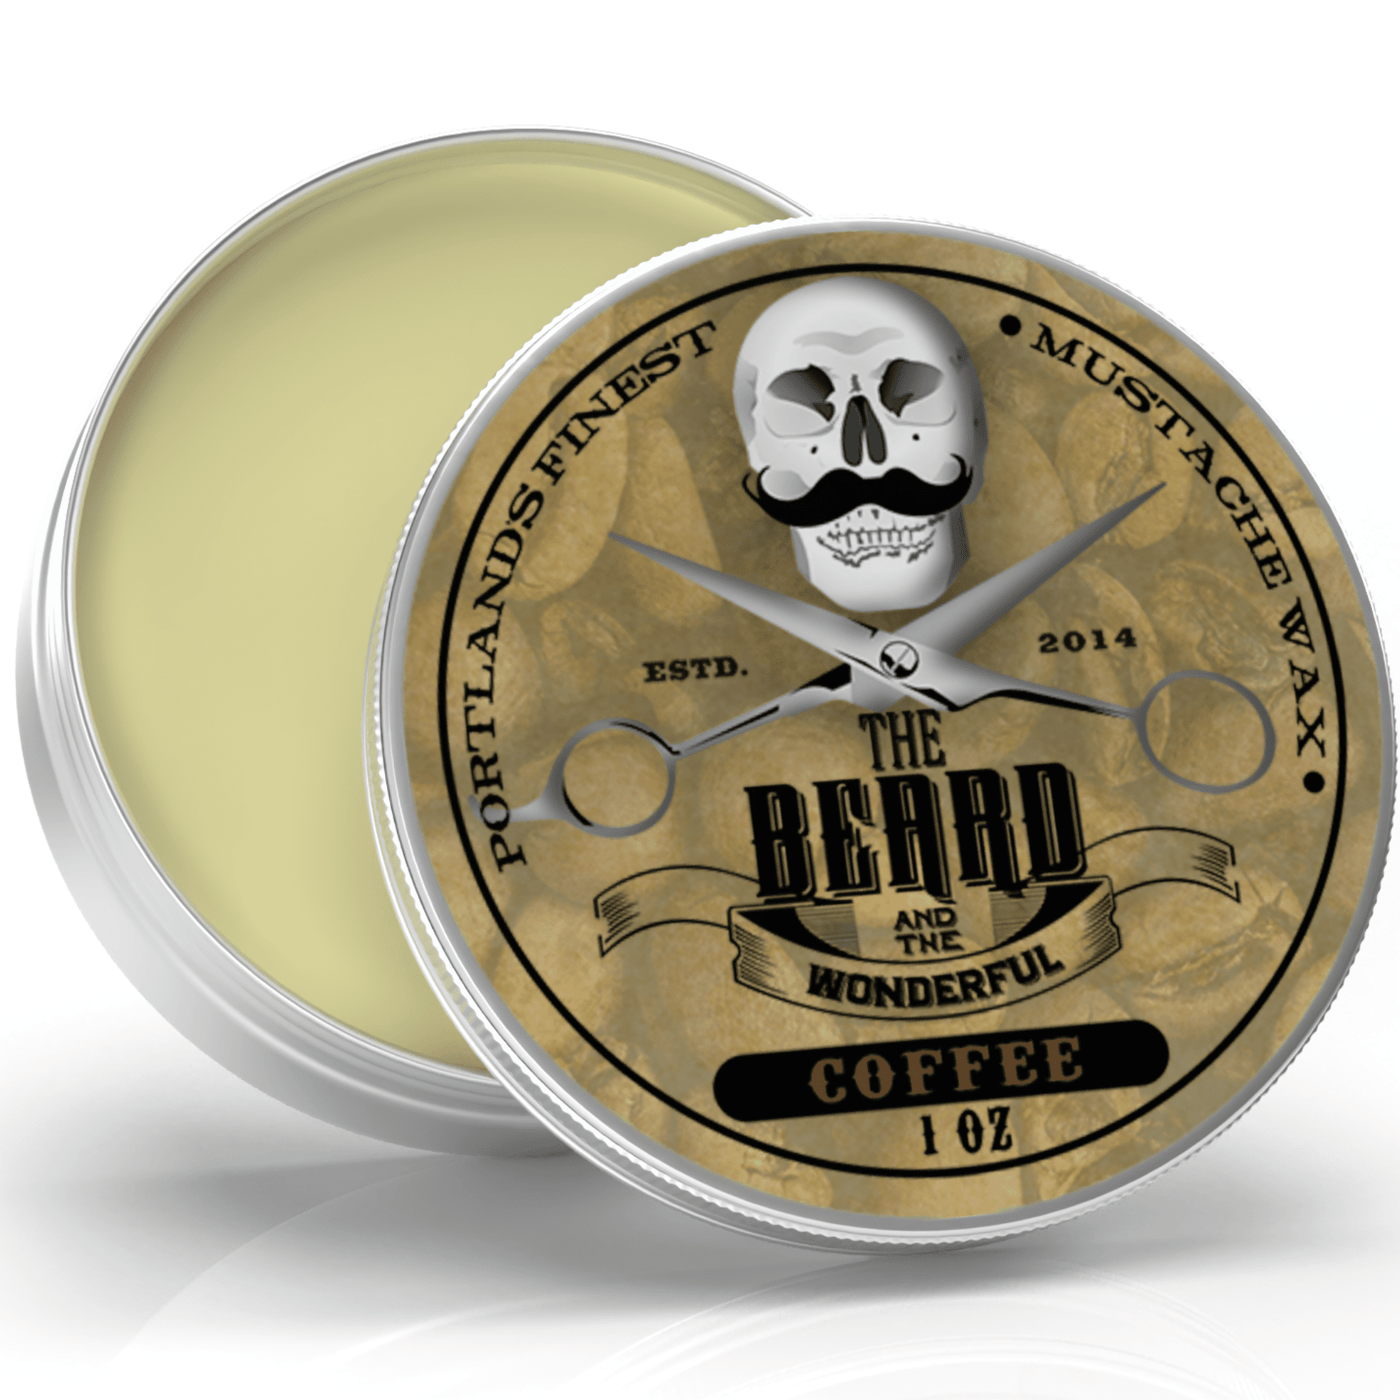 Beard and Moustache Wax Strong Hold Traditional Men's Grooming The Beard and The Wonderful Coffee (Wake up and smell the...) 